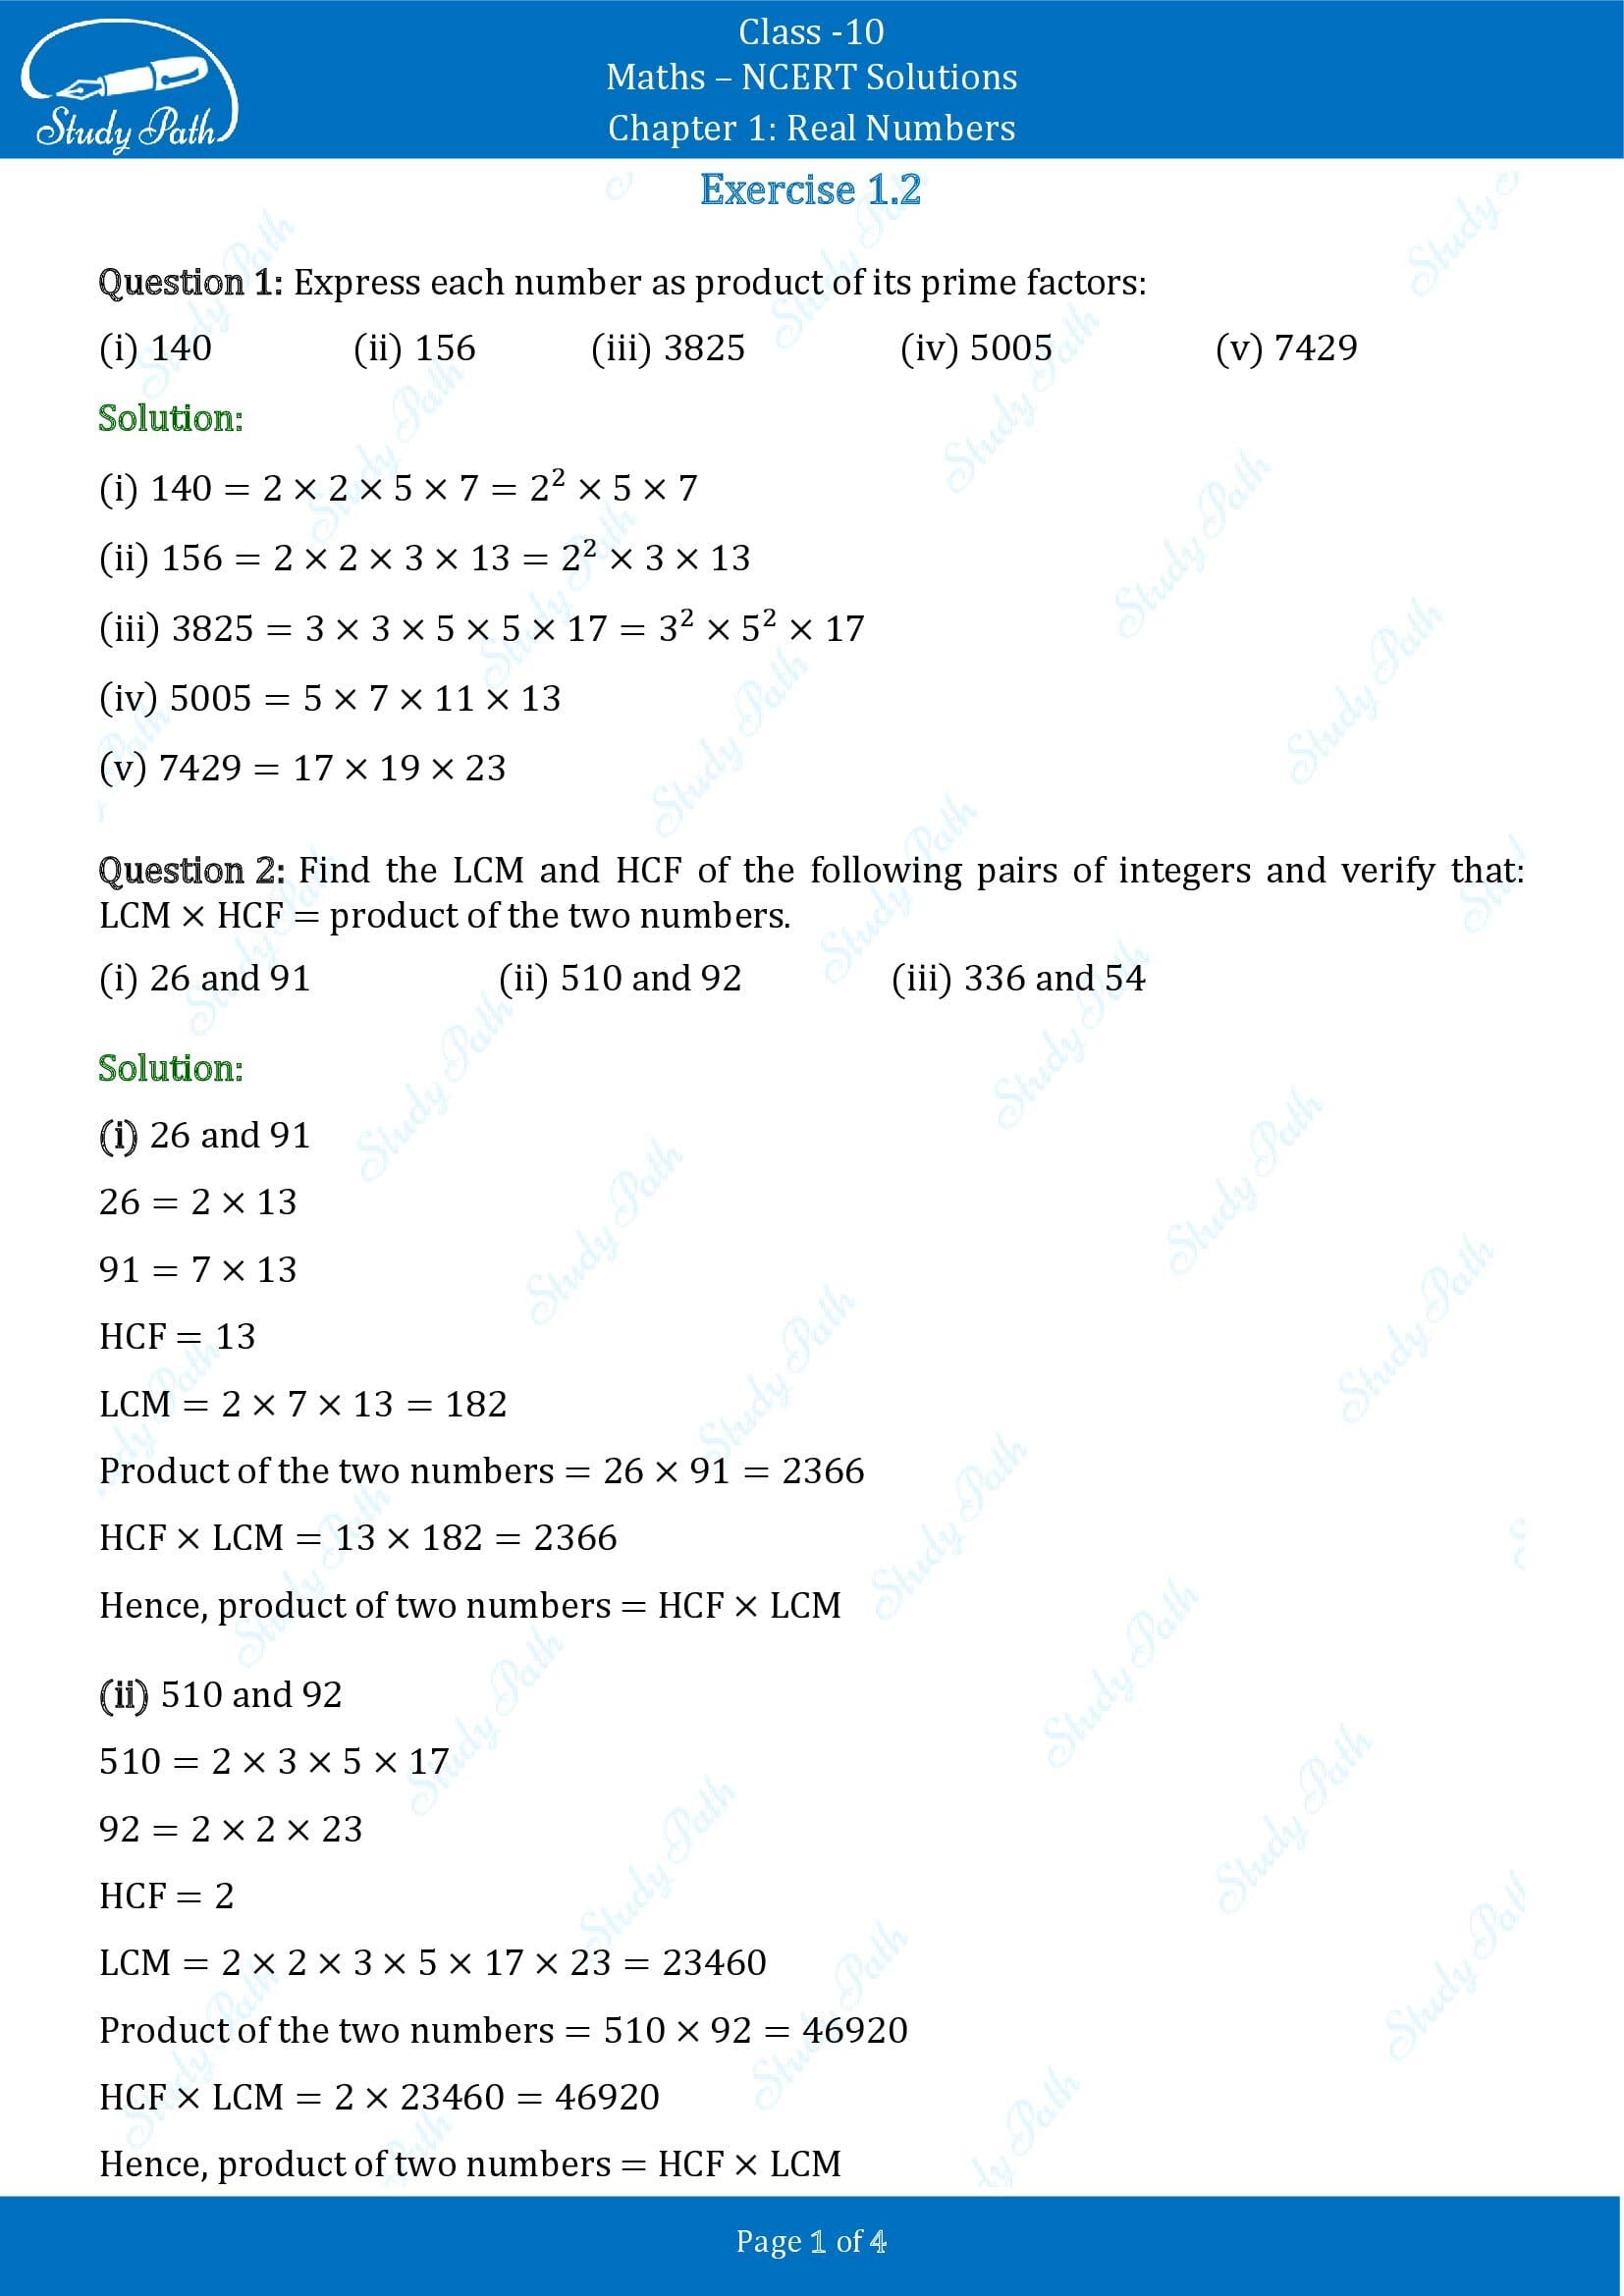 ncert-solutions-for-class-10-maths-exercise-1-2-chapter-1-real-numbers